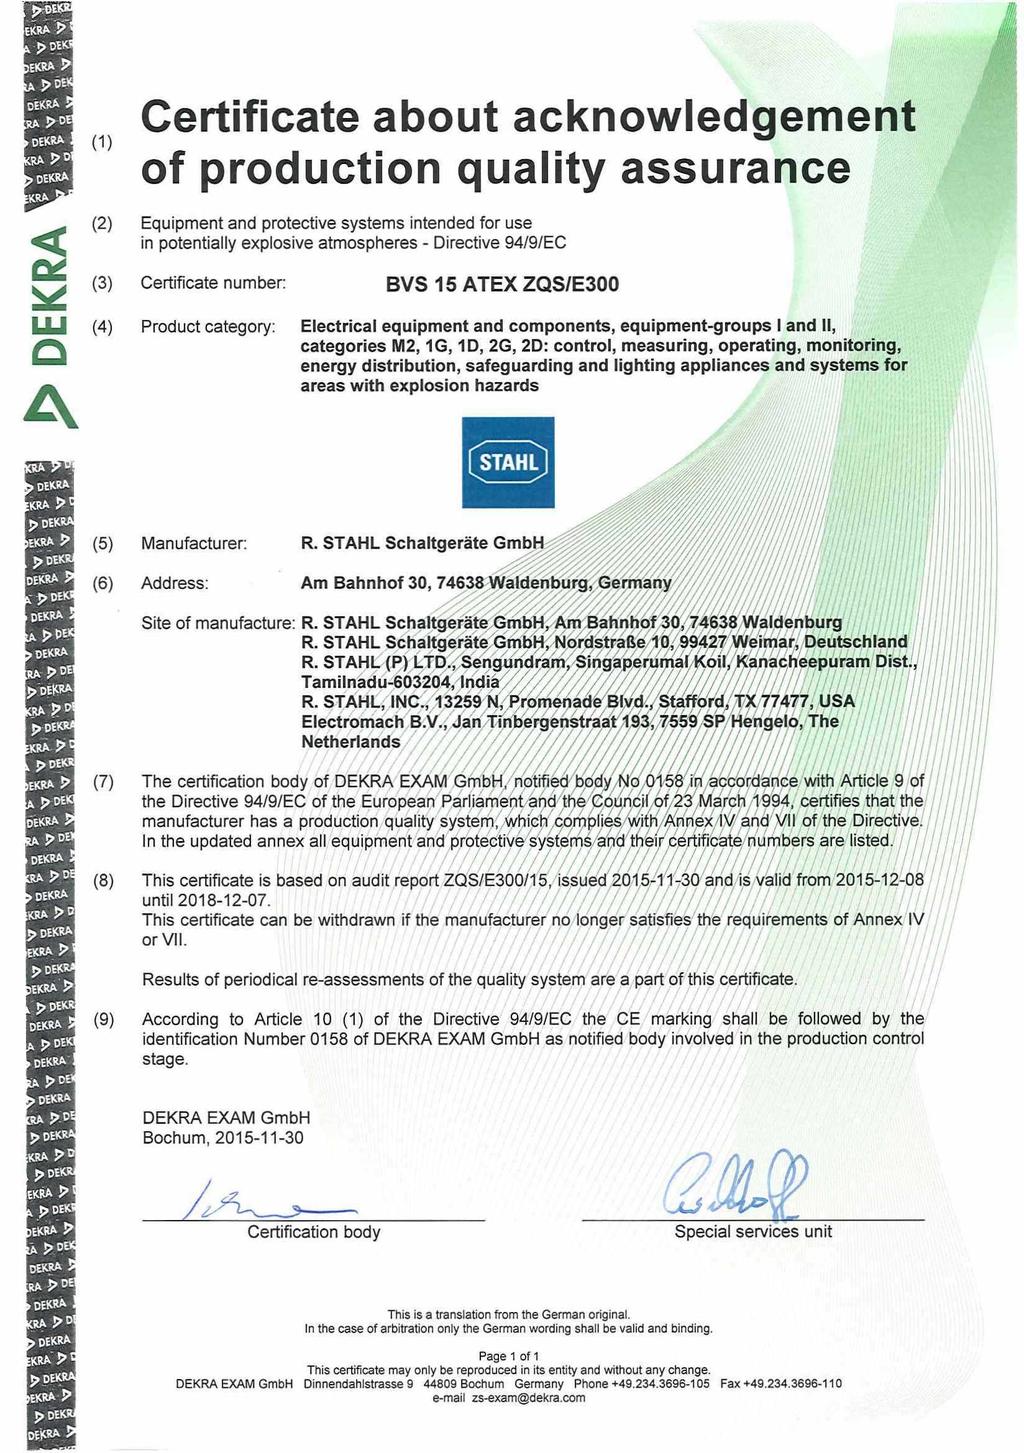 Certificate about acknowledgement of production quality assurance Equipment and protective Systems intended for use in potentially explosive atmospheres - Directive 94/9/EC (3) Certificate number: